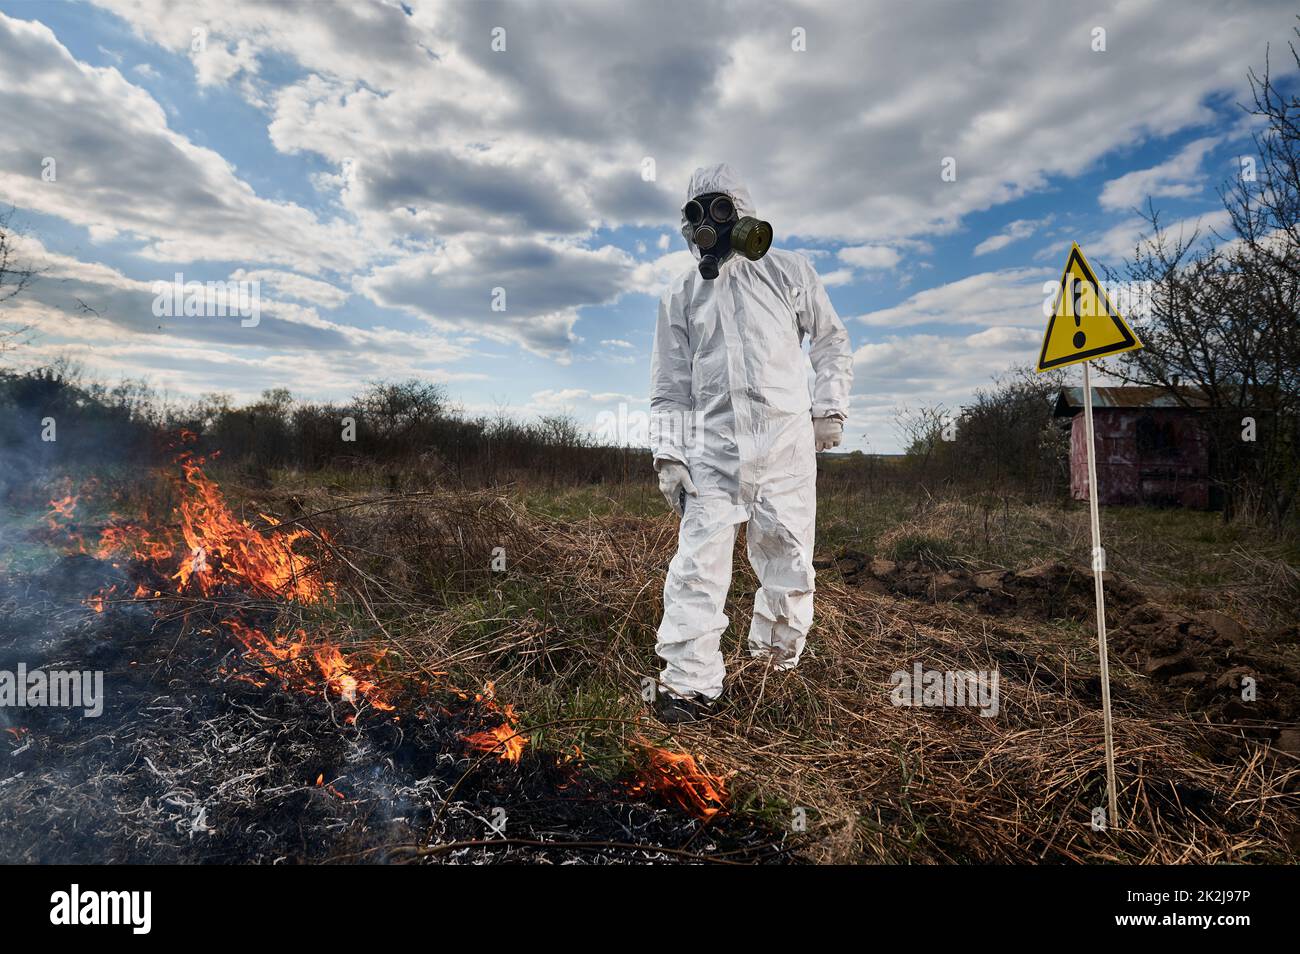 Firefighter ecologist working in field with wildfire. Man in protective radiation suit and gas mask near burning grass with smoke and warning sign with exclamation mark. Natural disaster concept. Stock Photo